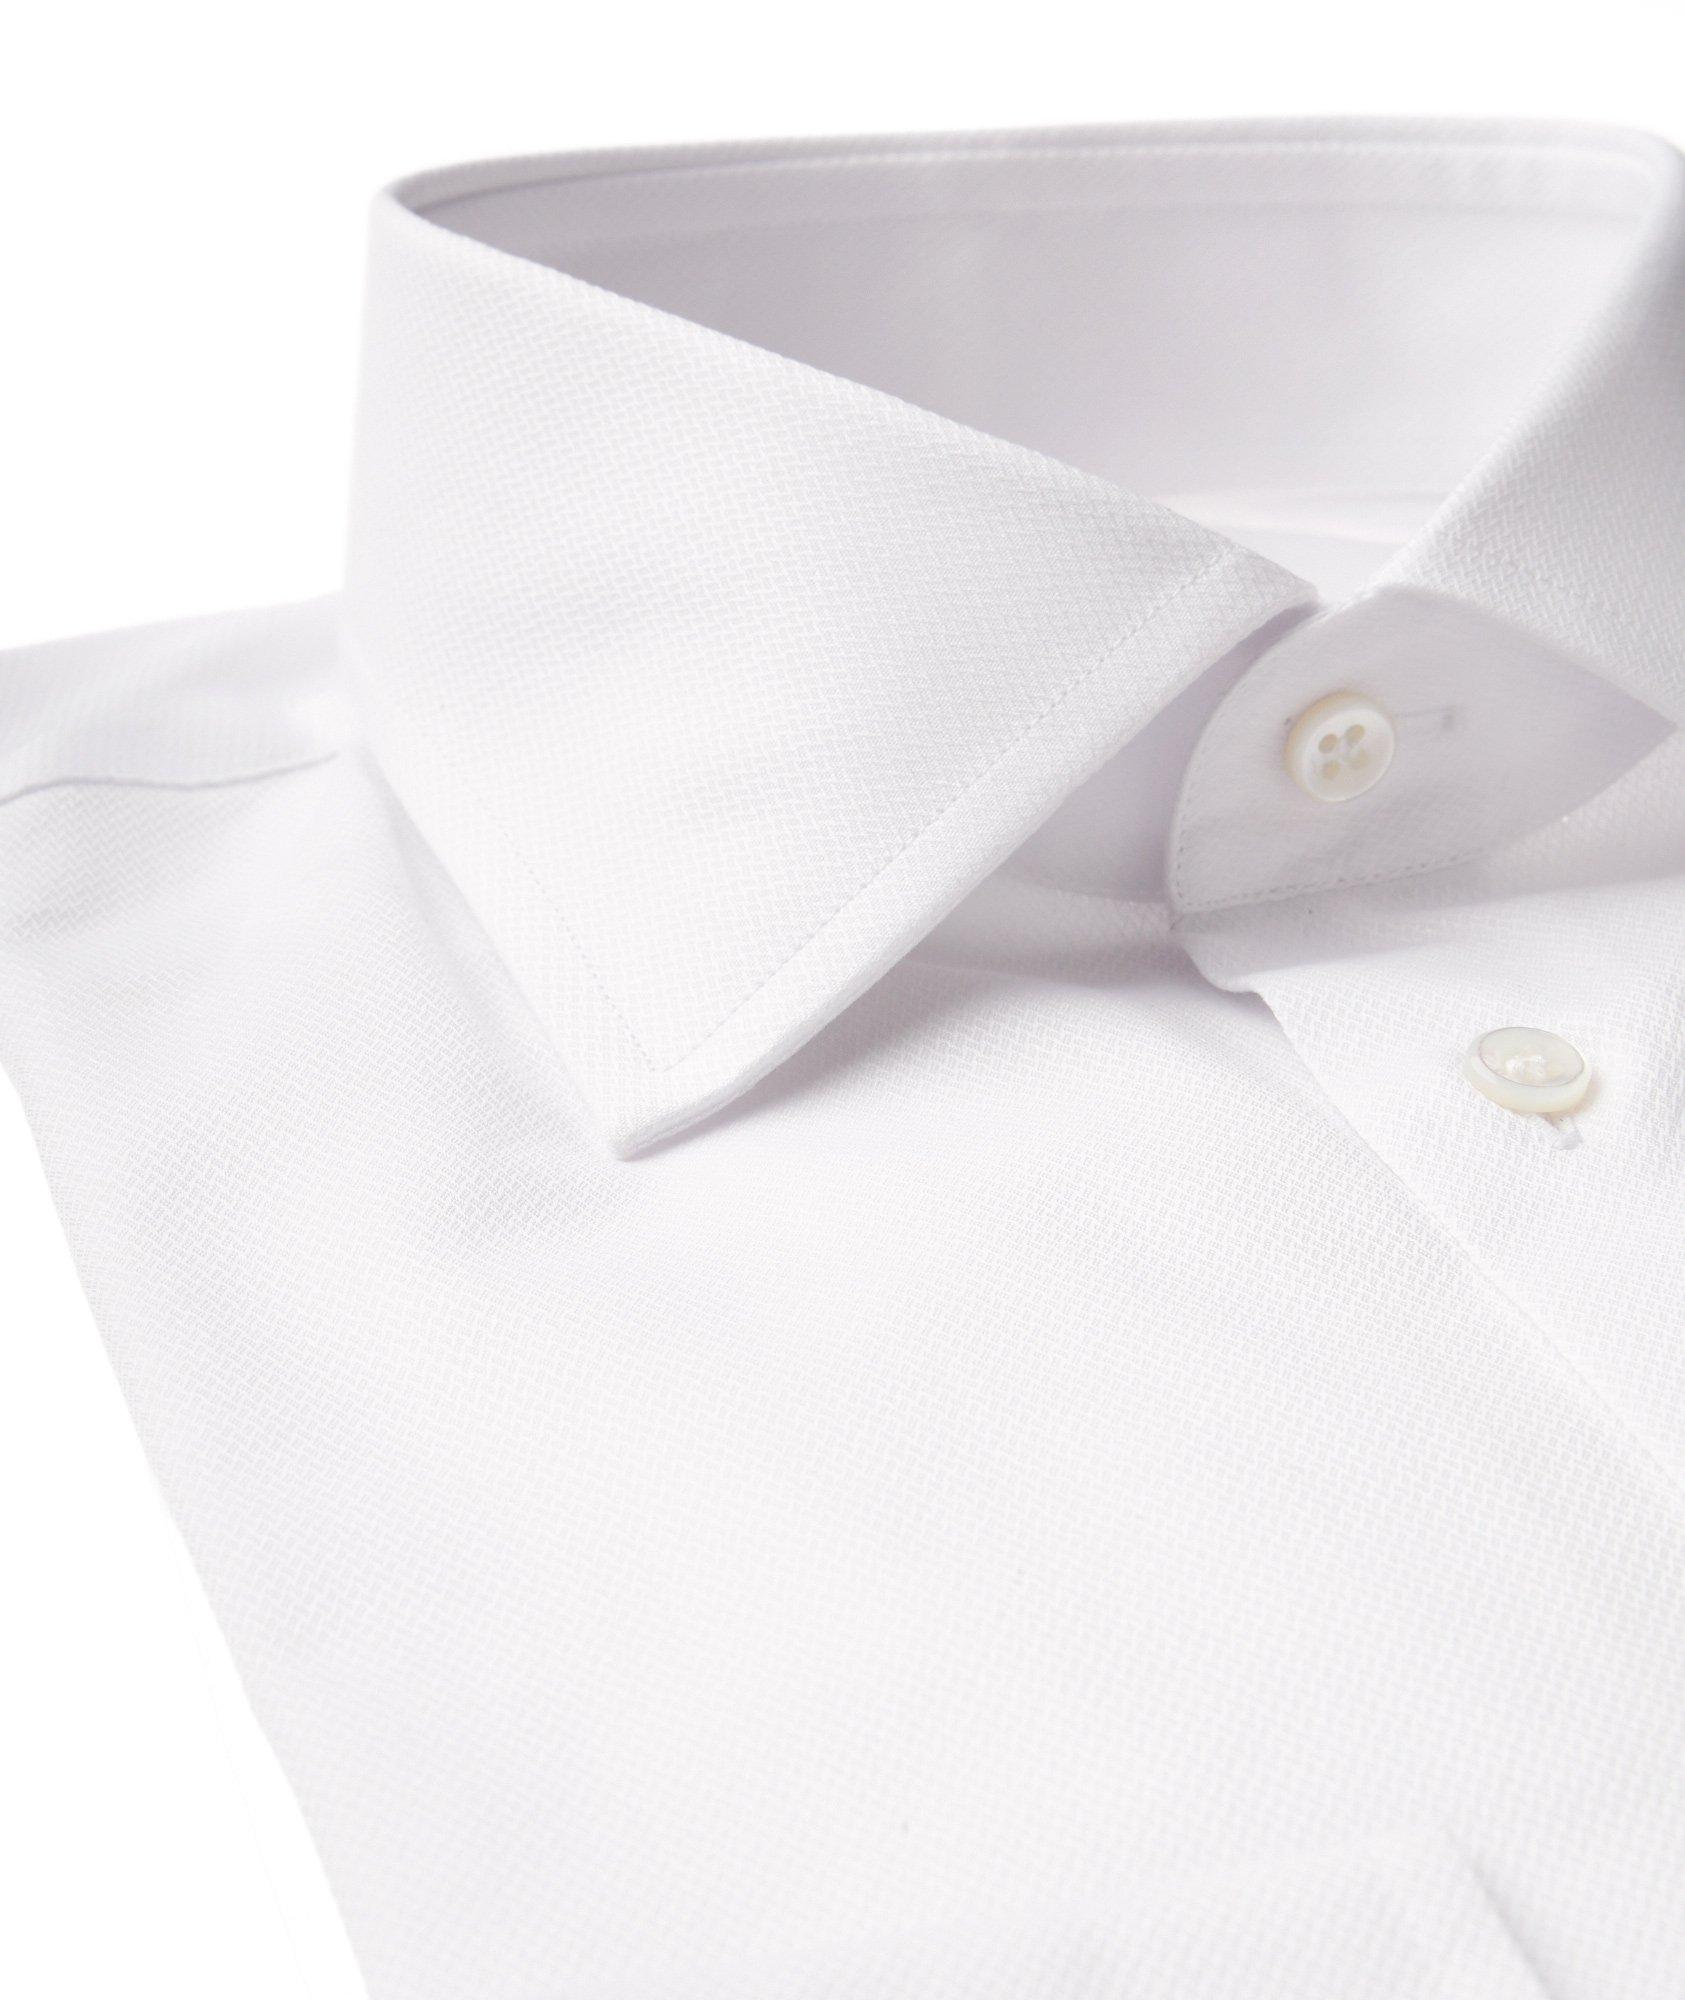 Contemporary Fit Textured Dress Shirt image 1